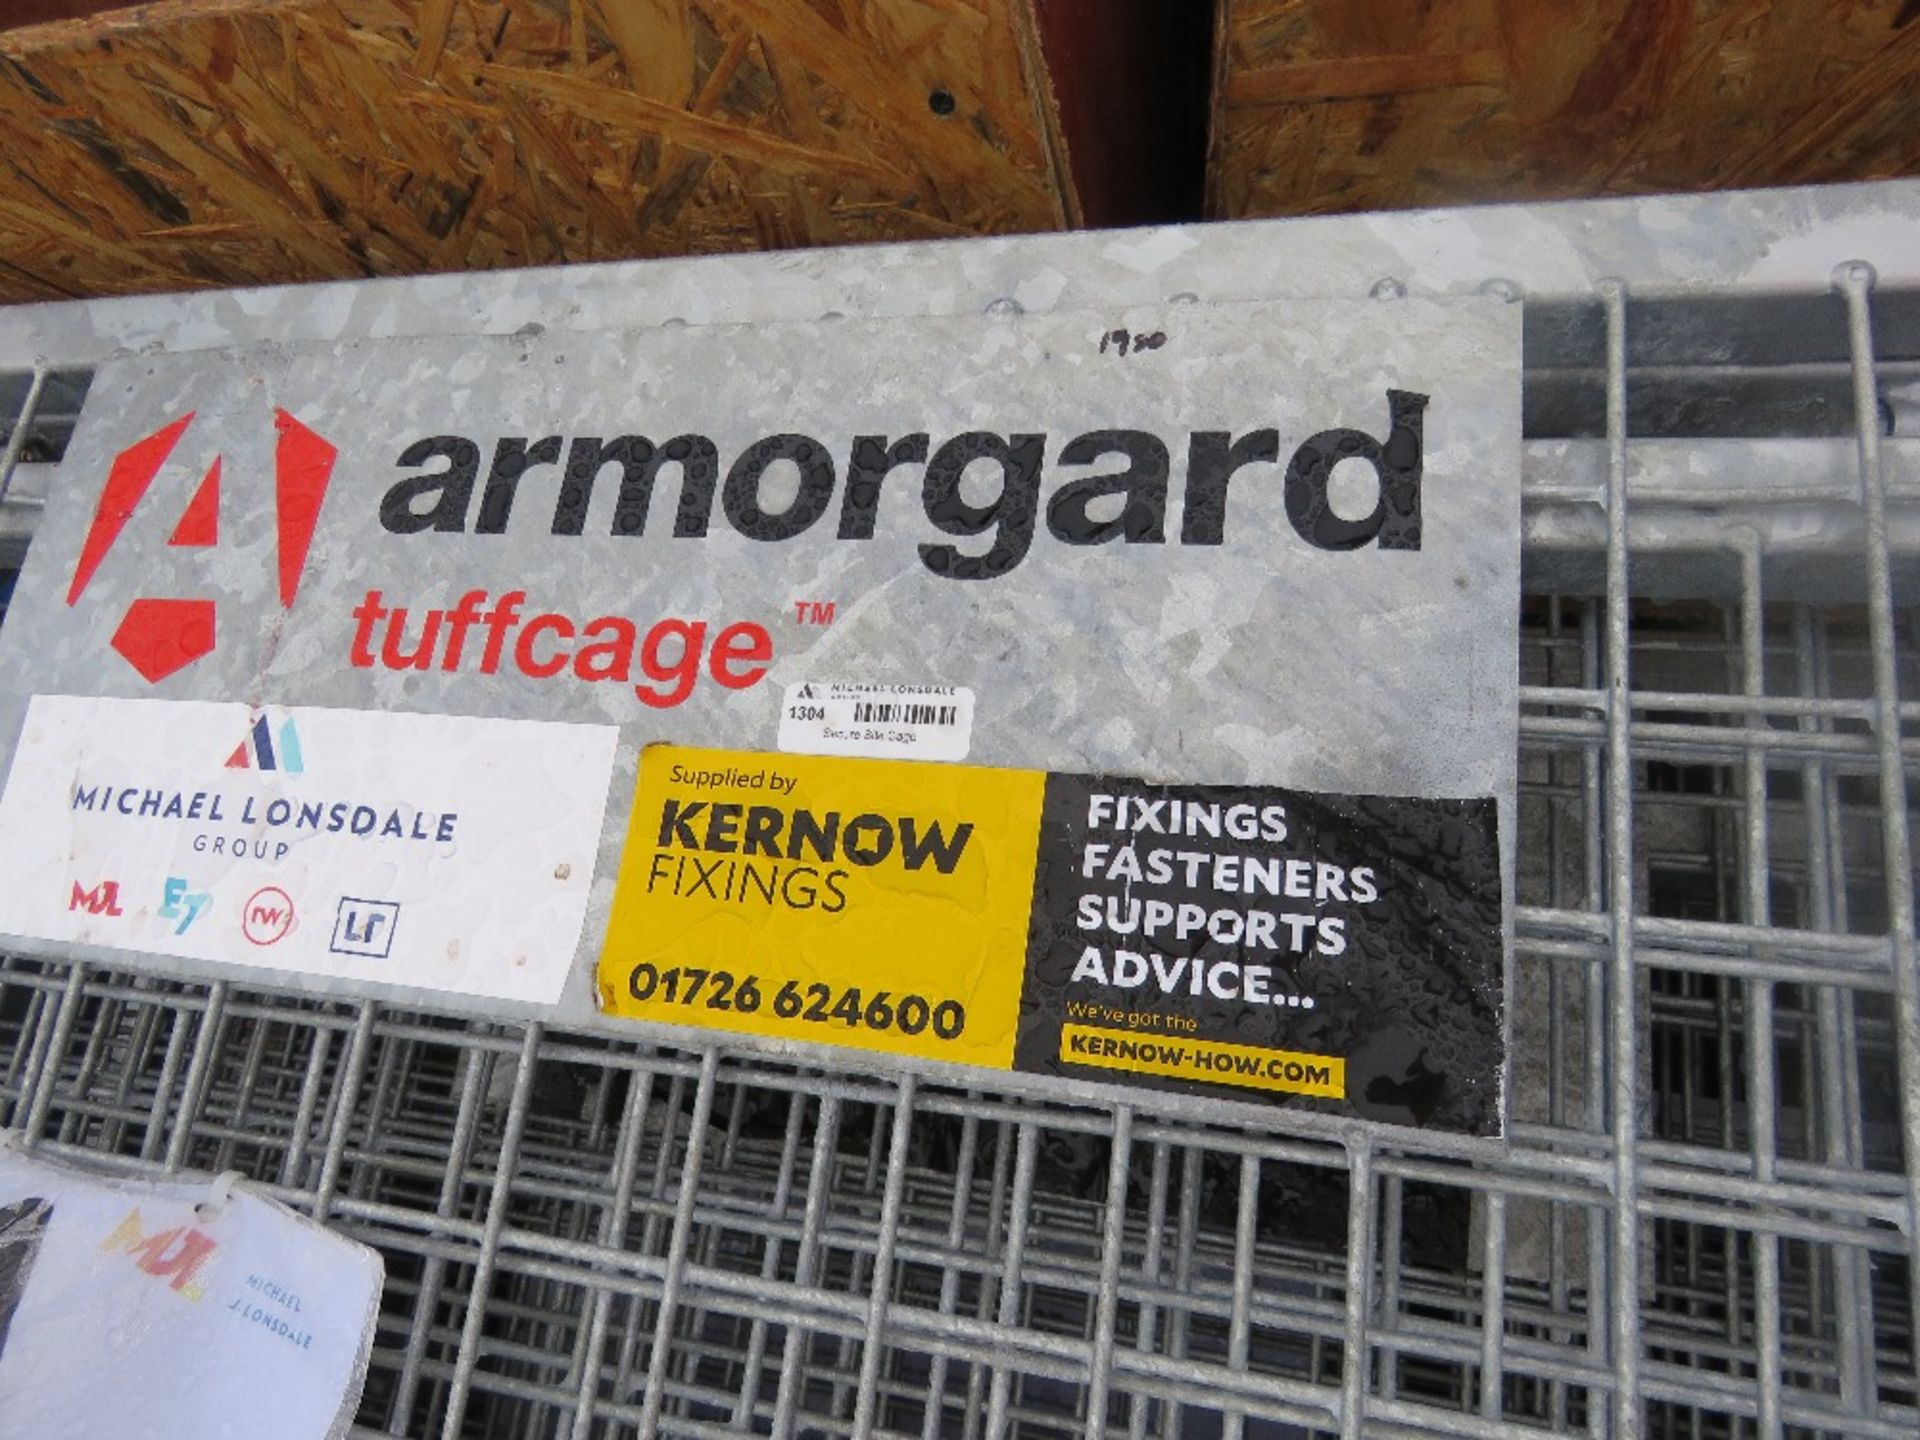 ARMORGARD TUFFCAGE FORKLIFT MOUNTED BOTTLE CAGE, FOLDING. SOURCED FROM LARGE CONSTRUCTION COMPANY - Image 5 of 5